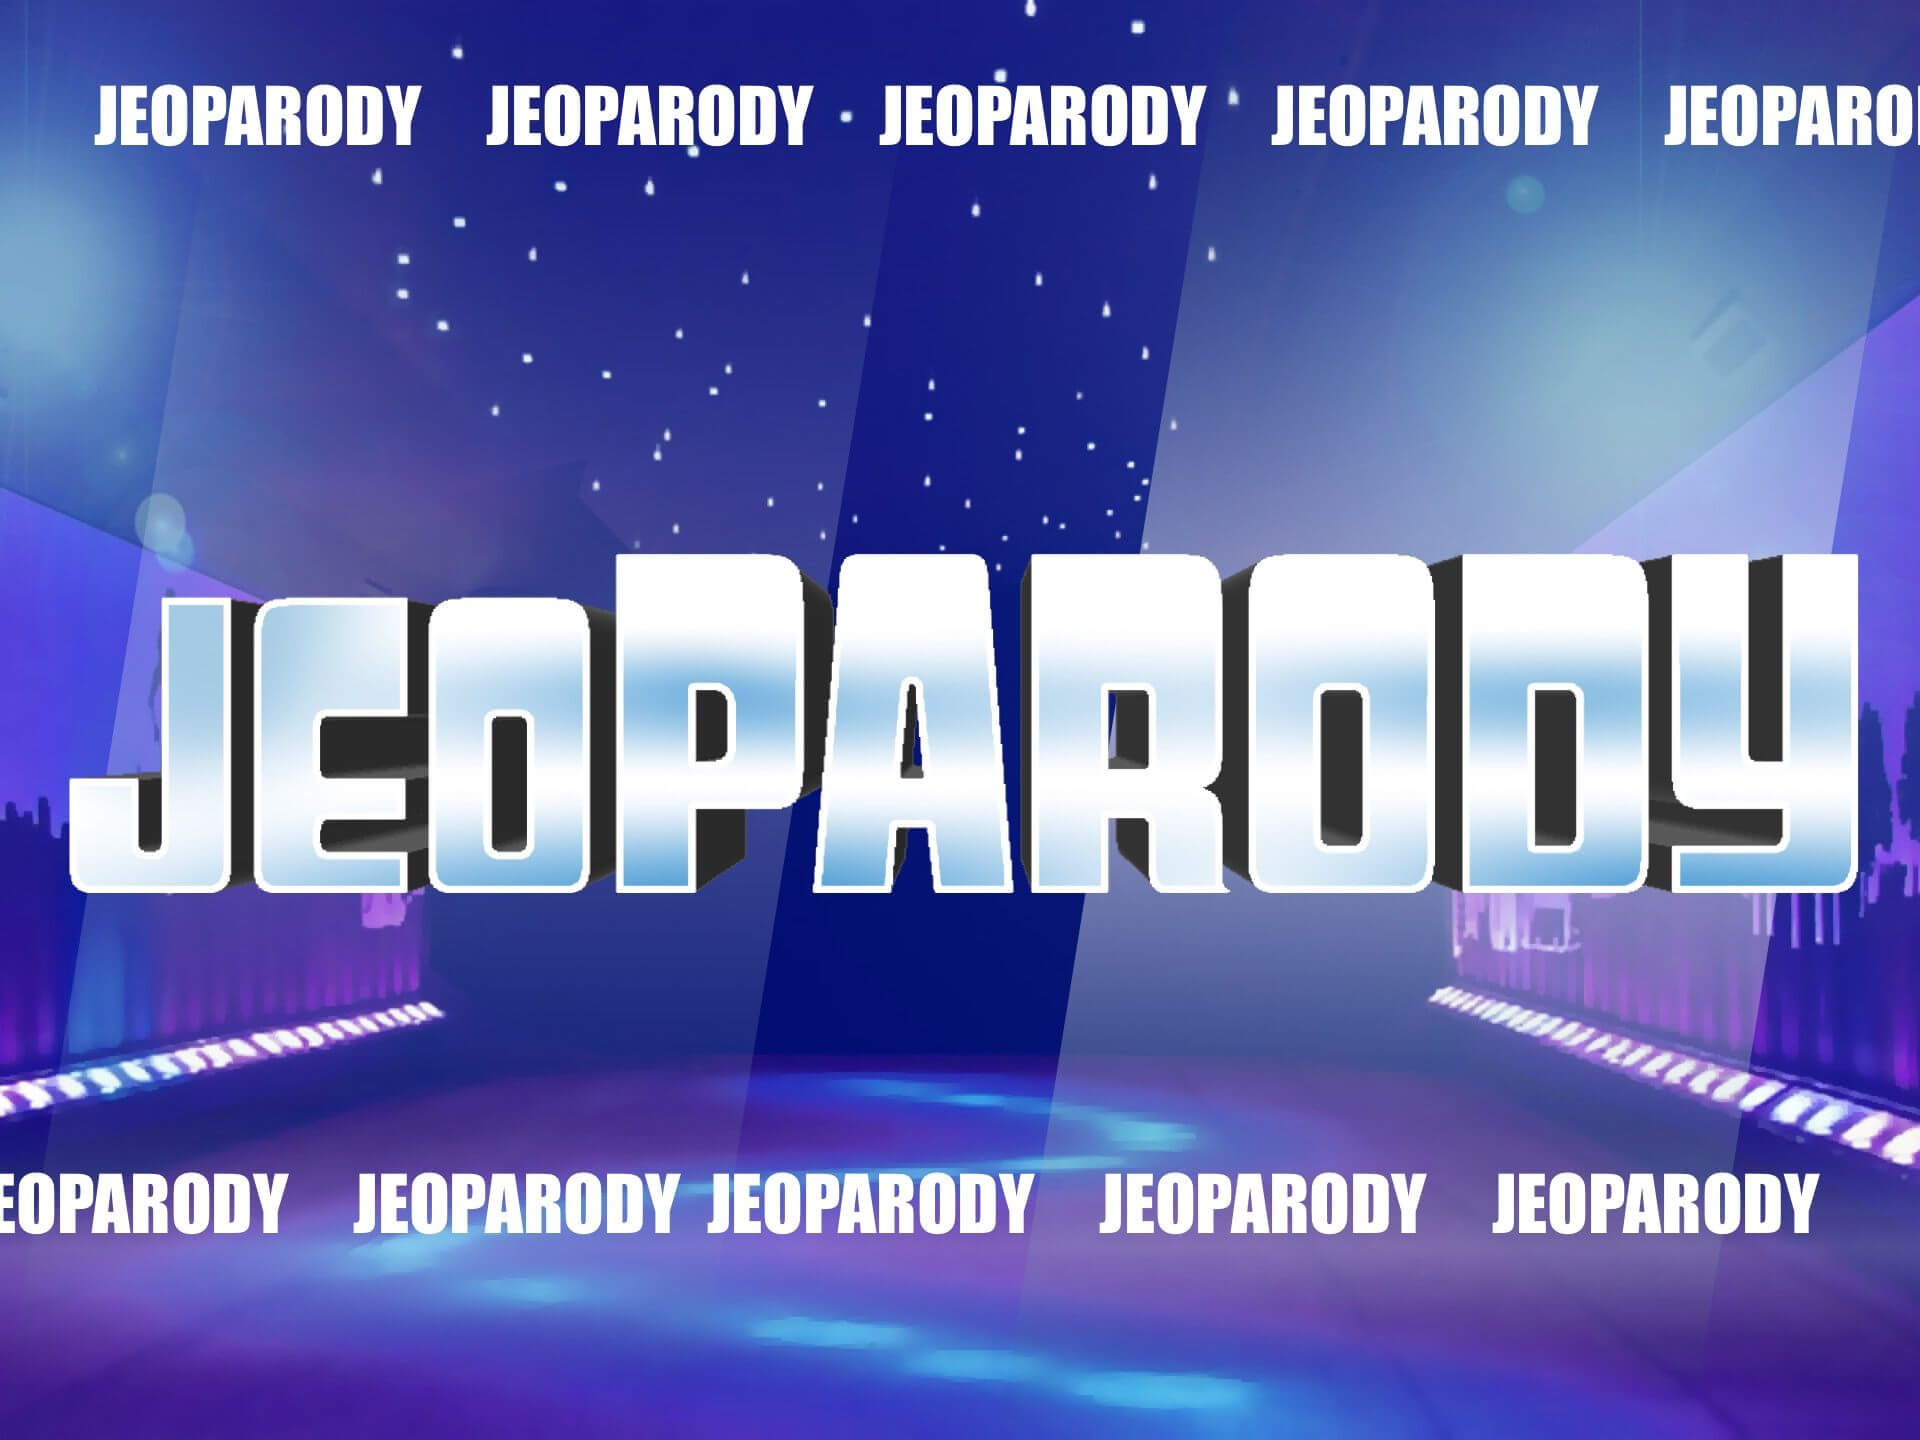 Fully Editable Jeopardy Powerpoint Template Game With Daily Pertaining To Jeopardy Powerpoint Template With Score